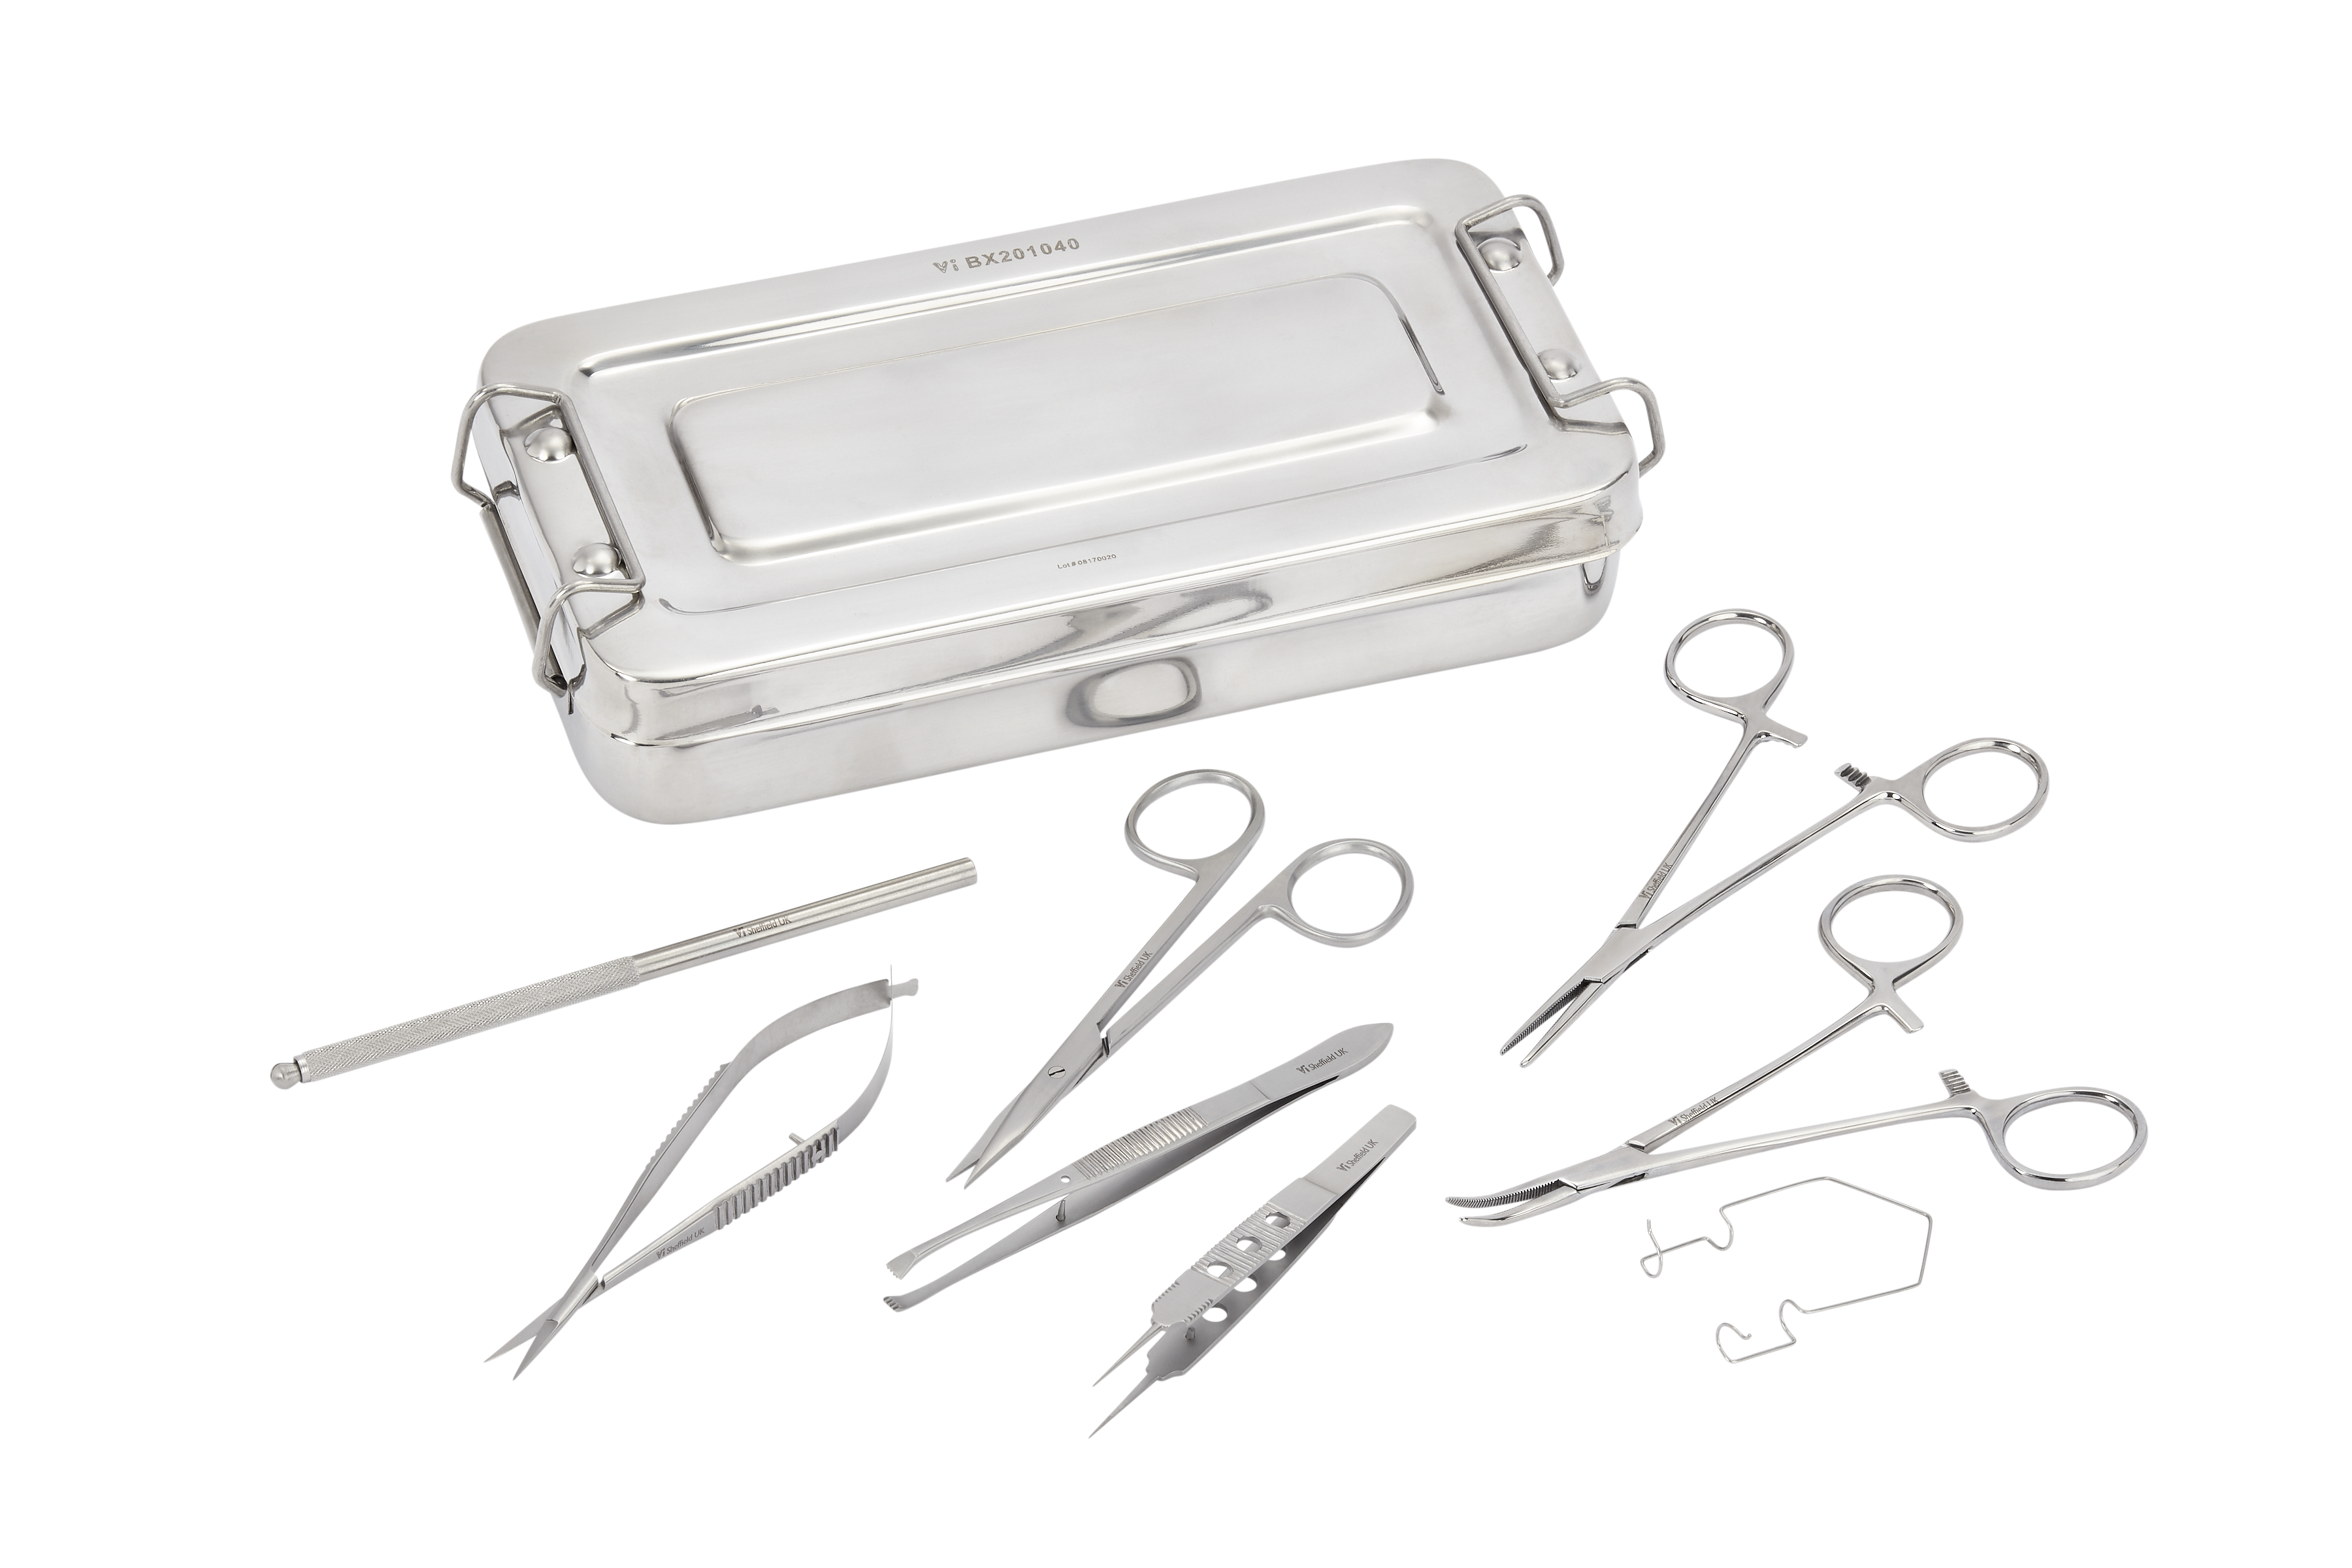 Ophthalmic Surgery Kits